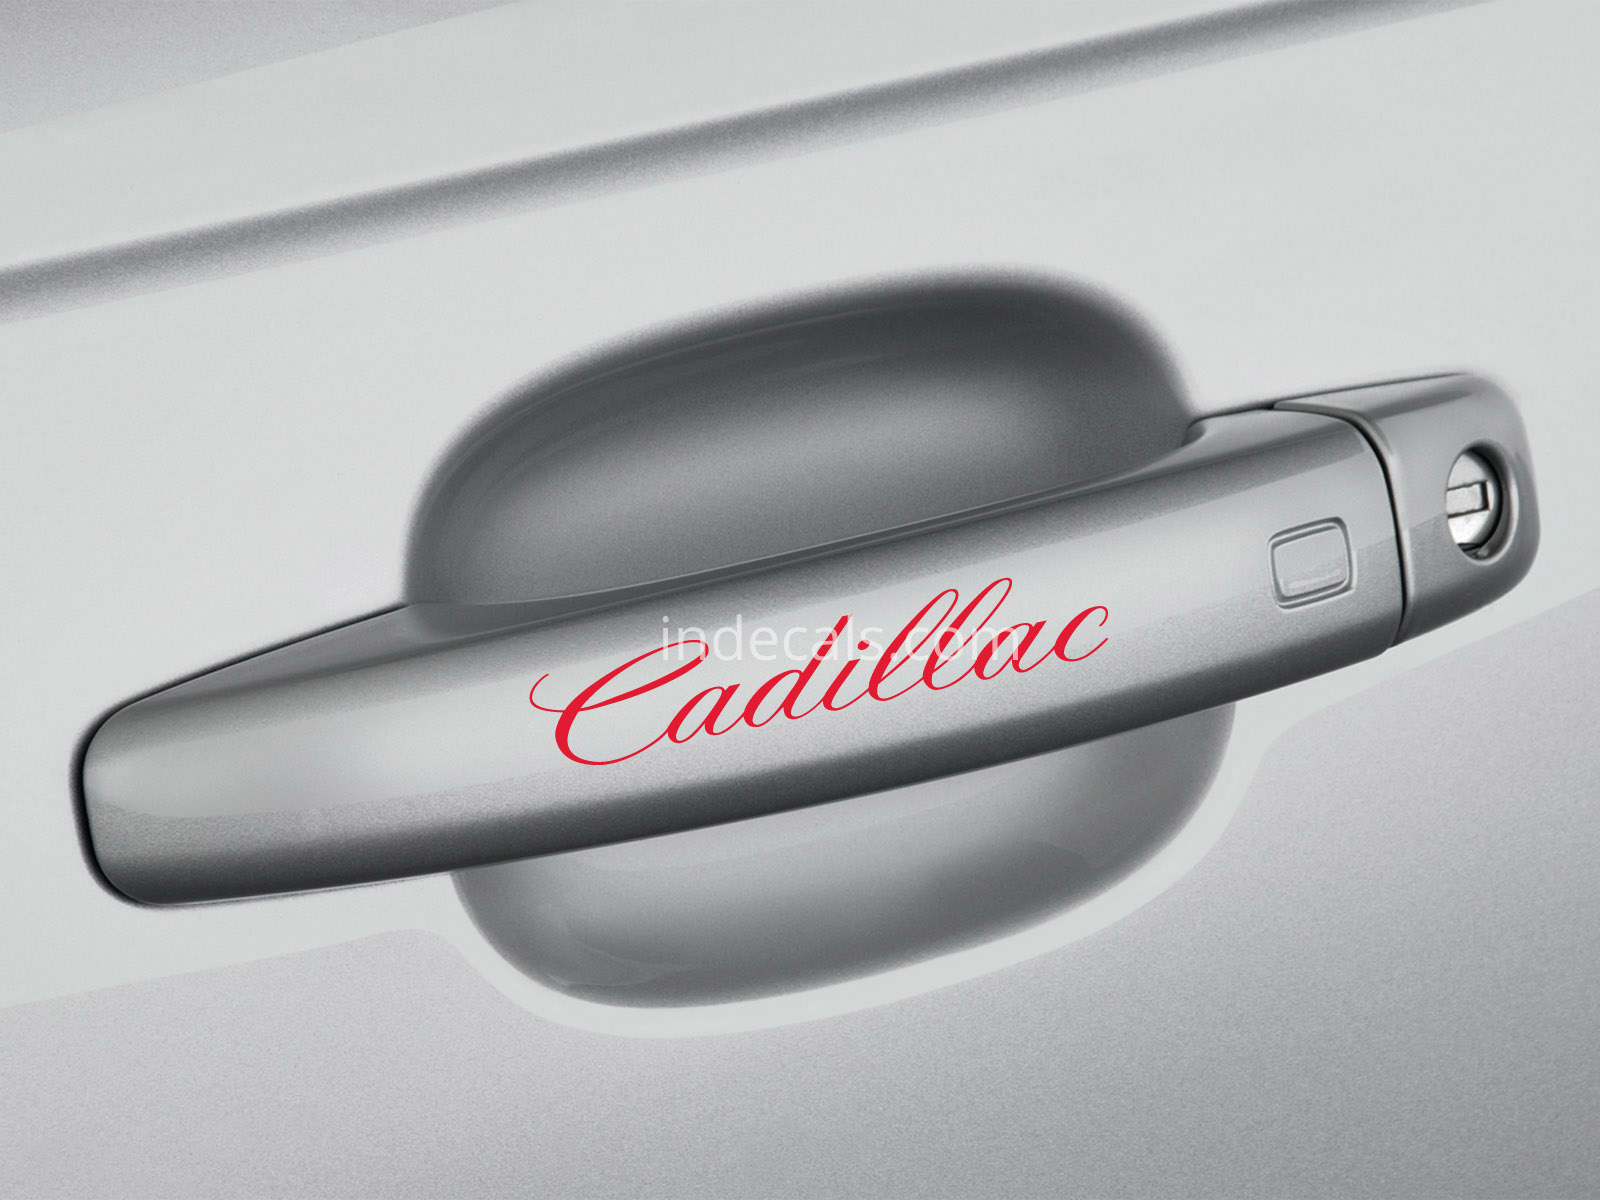 6 x Cadillac Stickers for Door Handles - Red